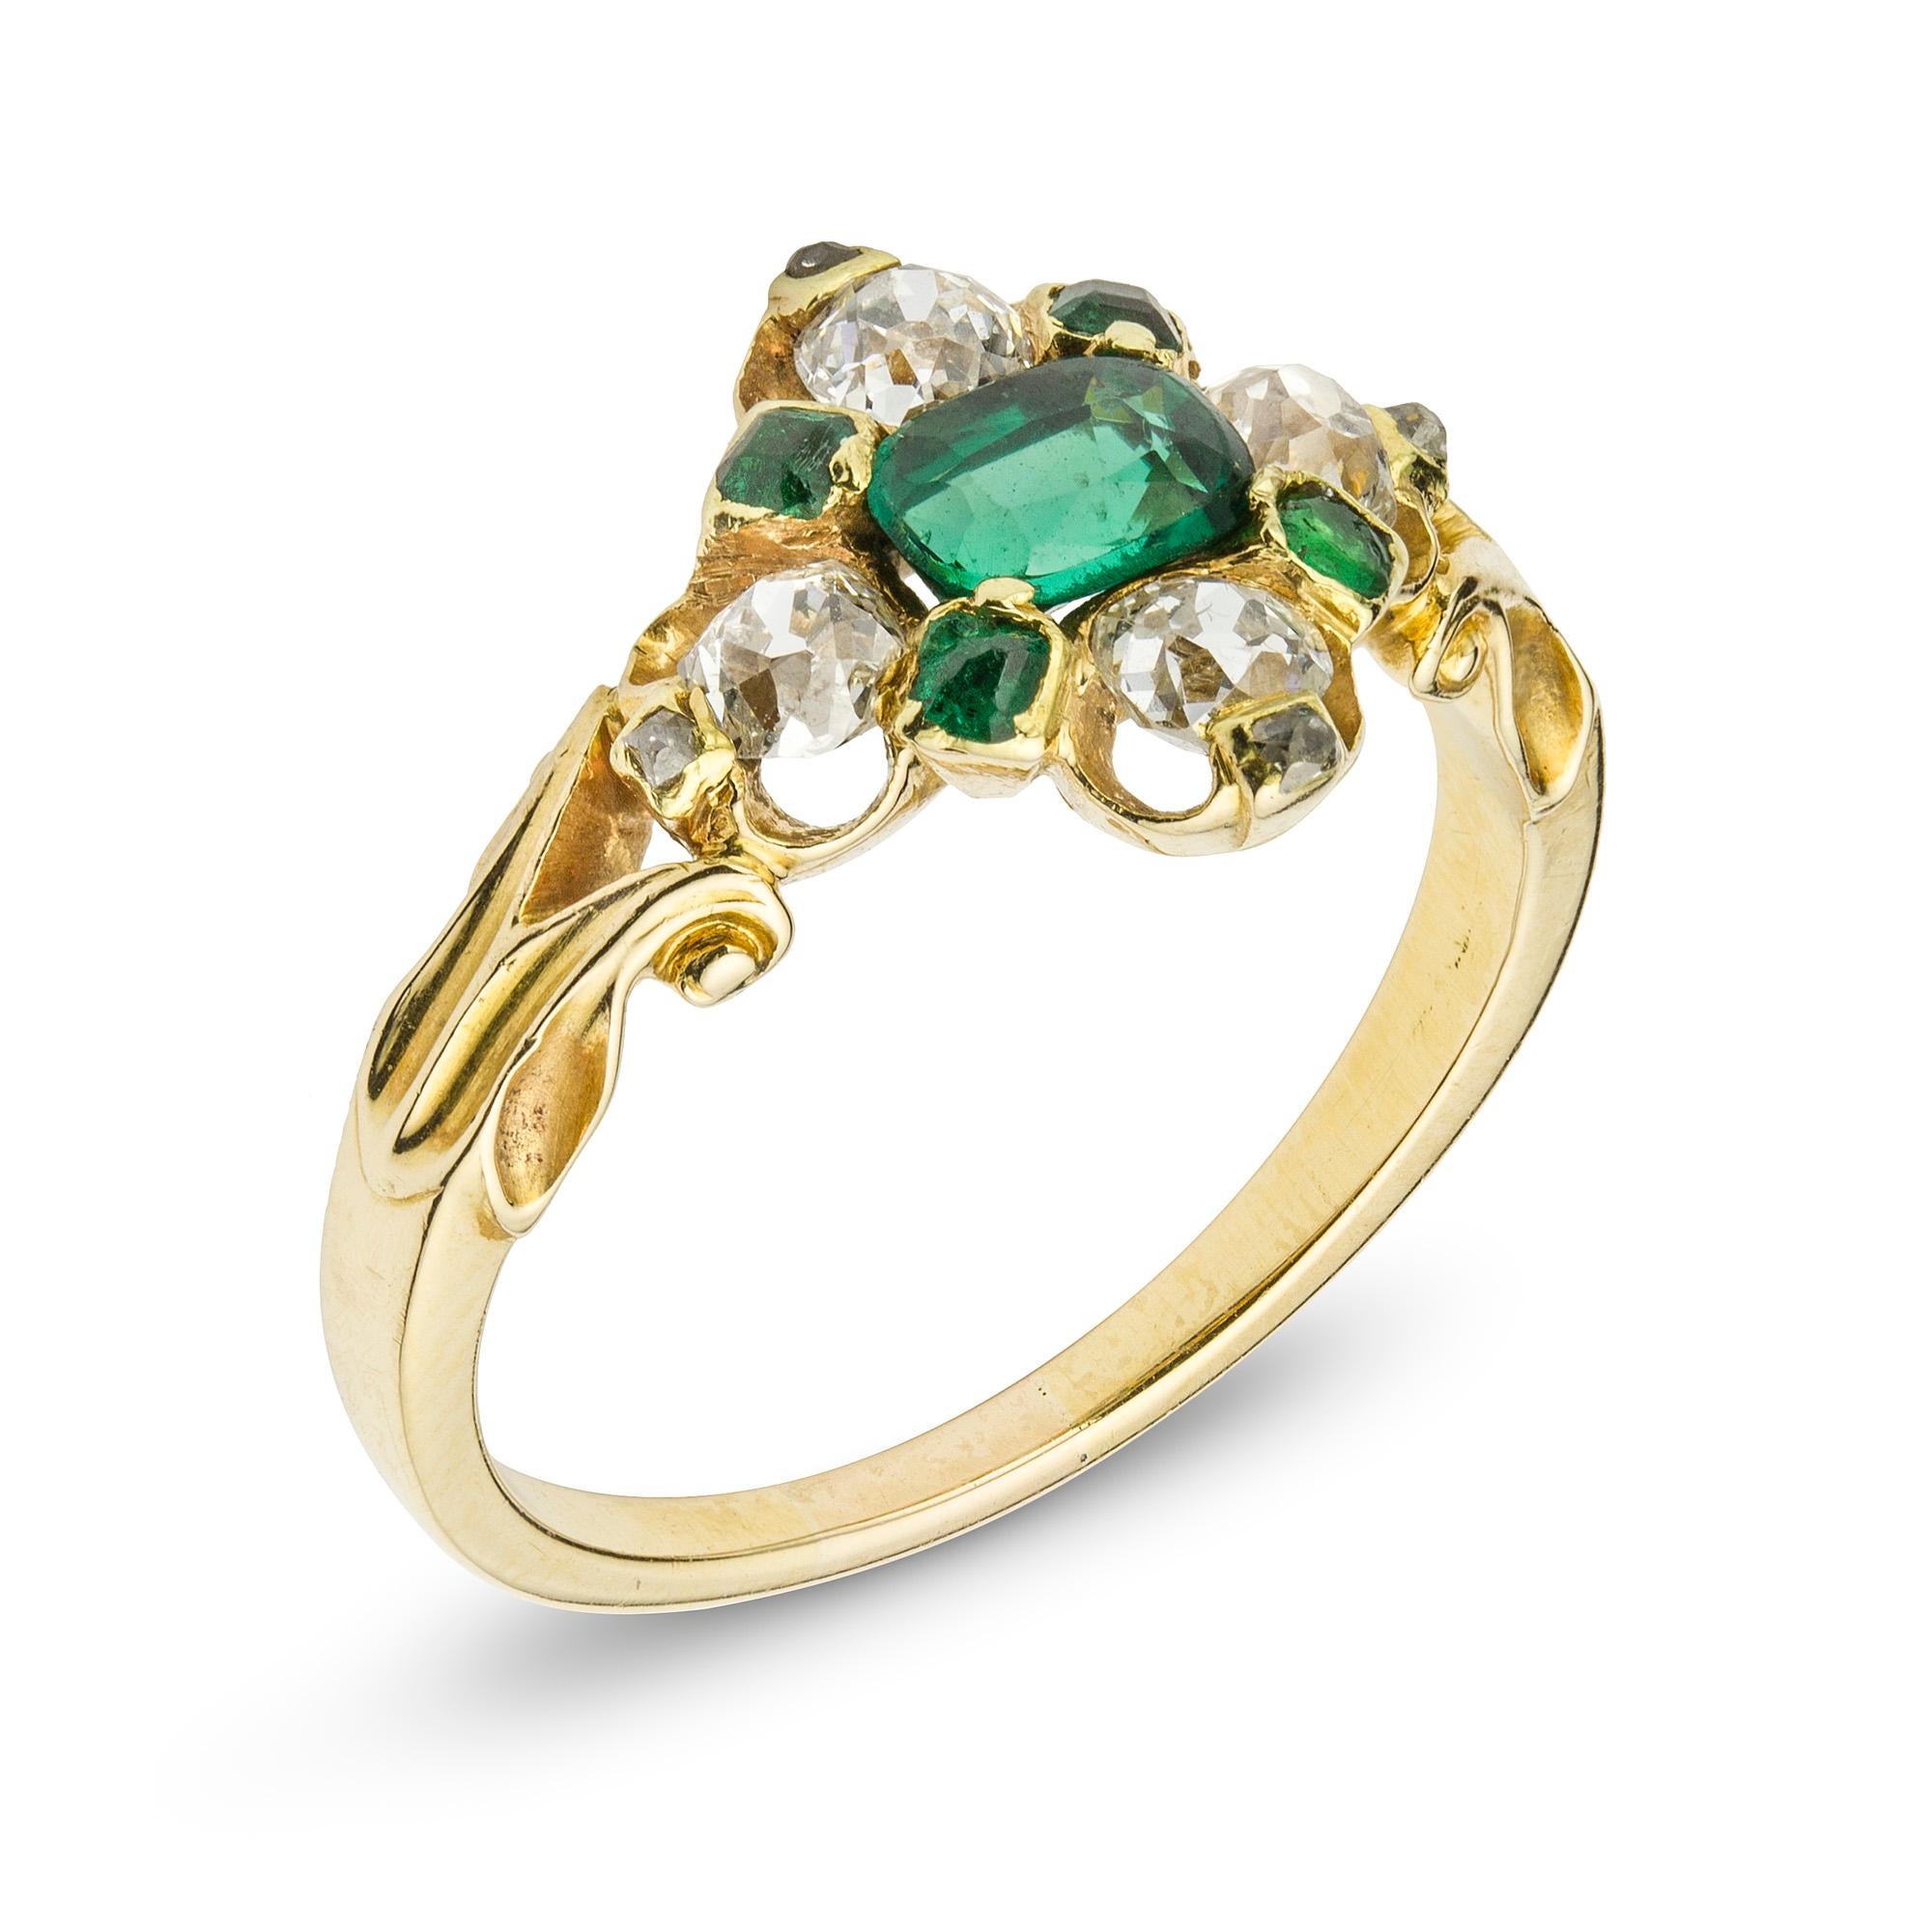 A Victorian emerald and diamond cluster ring, centred a mixed-cut oval emerald estimated weight 0.4 carats surrounded by four old round-cut diamonds estimated total weight of 0.6 carats set between four mixed-cut emeralds, to scroll openwork